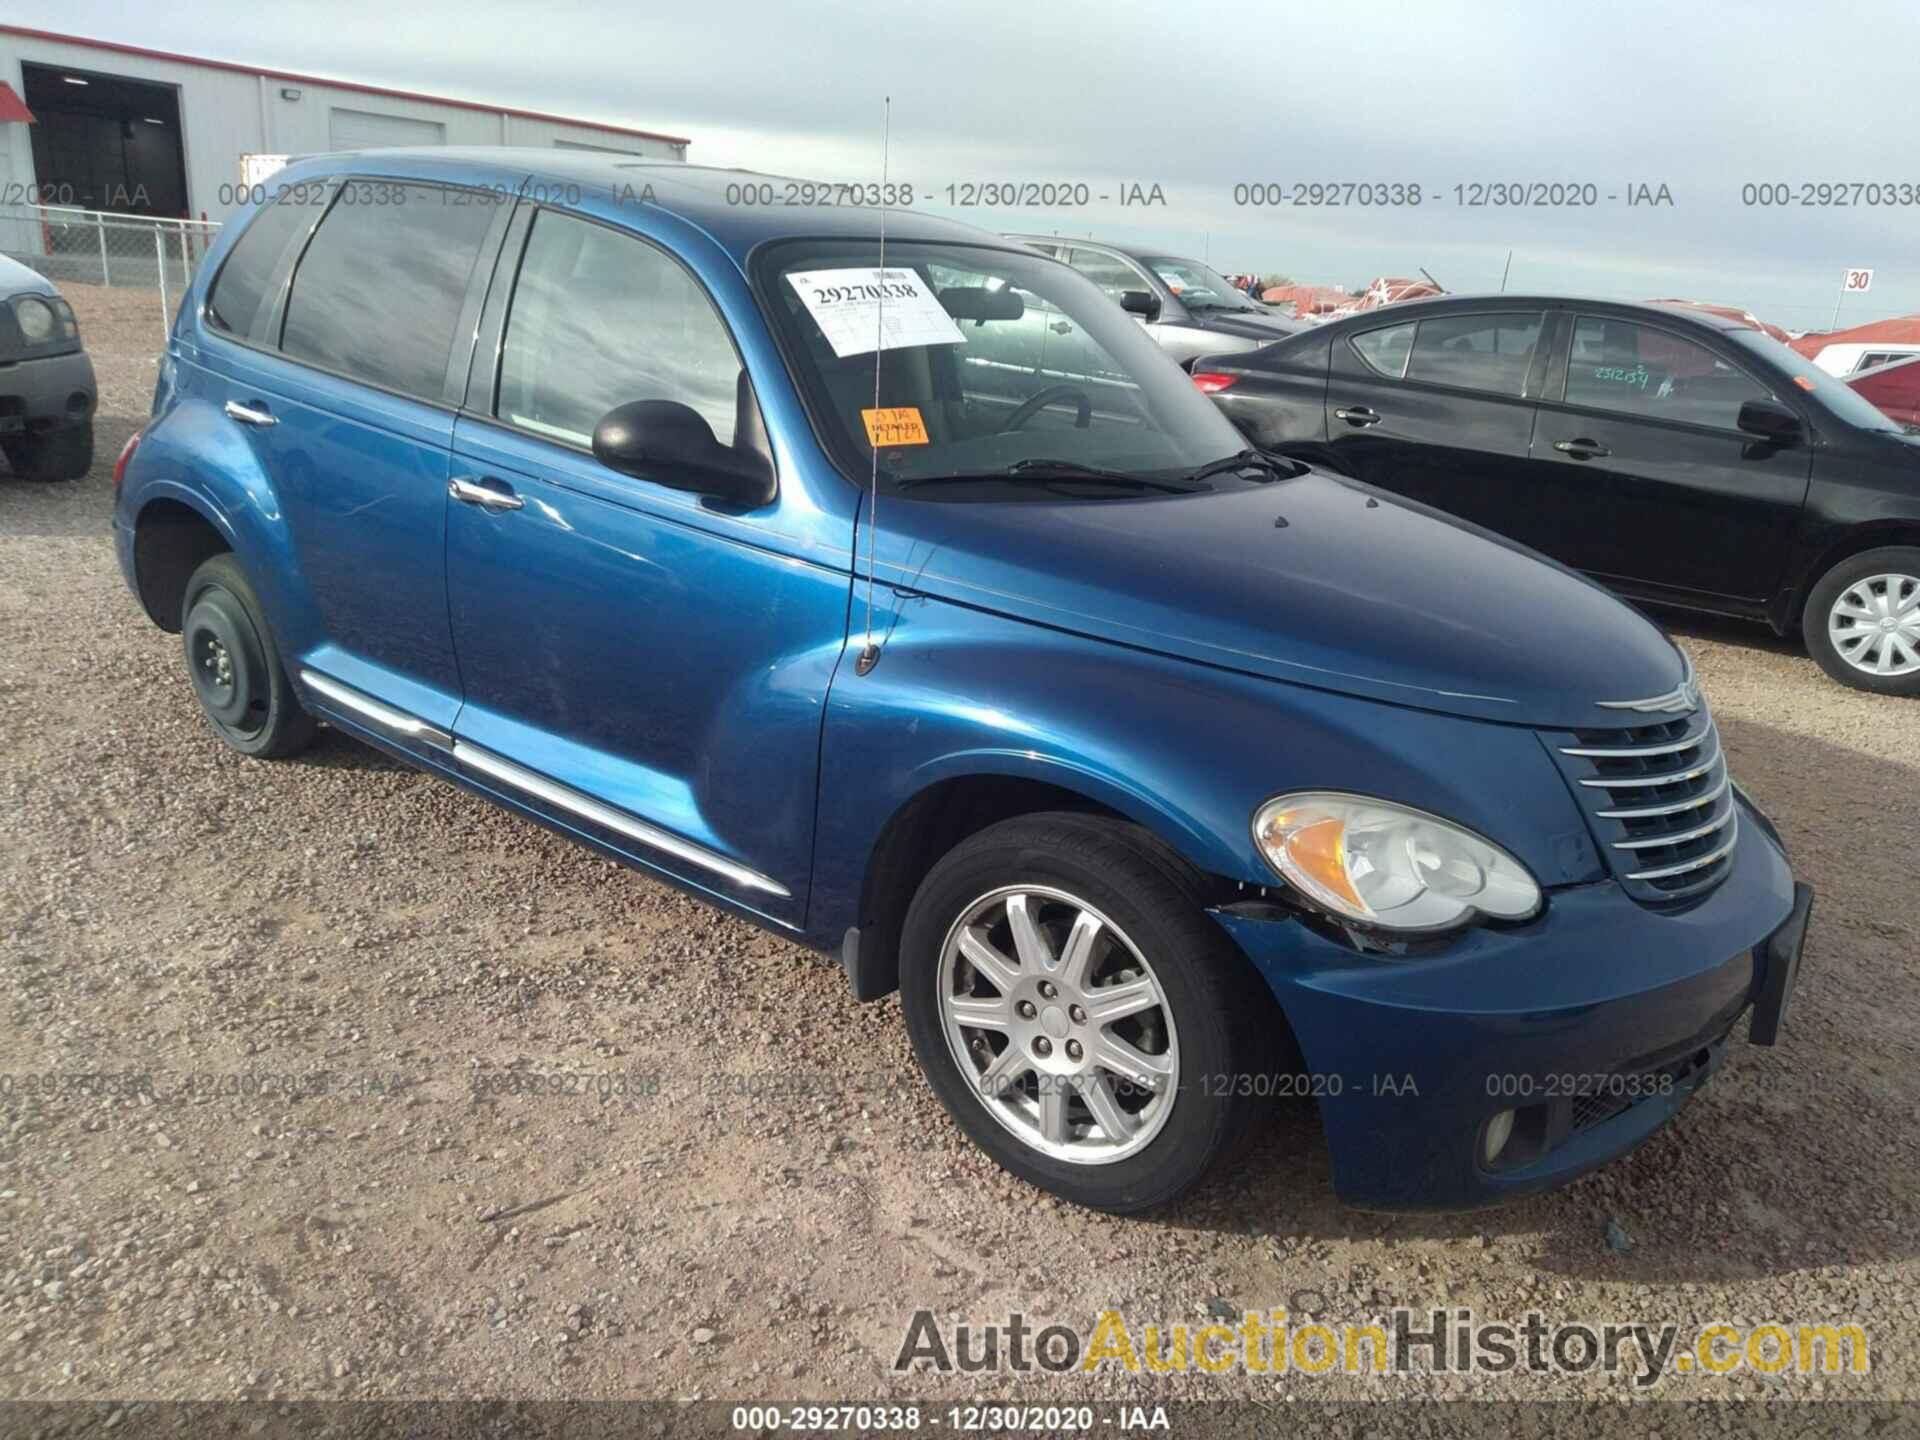 CHRYSLER PT CRUISER CLASSIC, 3A4GY5F93AT156221